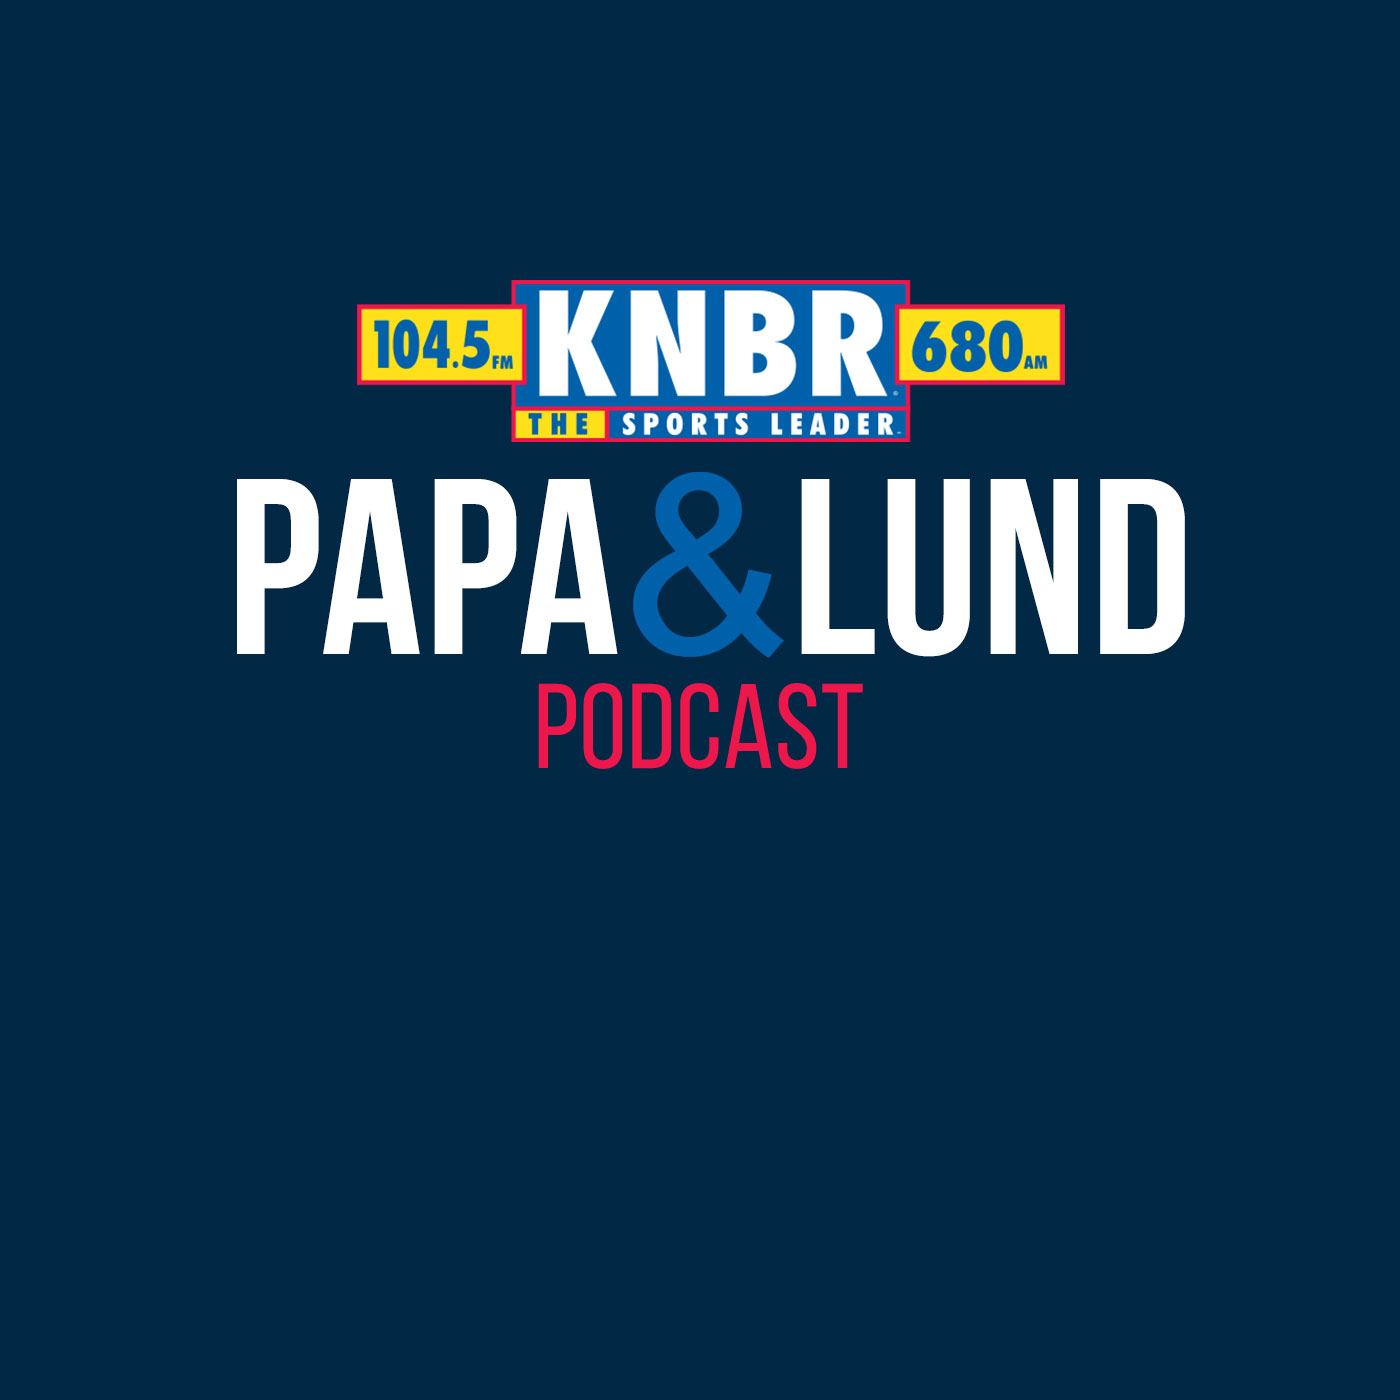 7-19 Andre Ethier joined Papa & Lund to discuss the All-Star festivities in LA and to talk about the Giants/Dodgers rivalry as the best in sports and how much of Kershaws success feeds into that rivalry